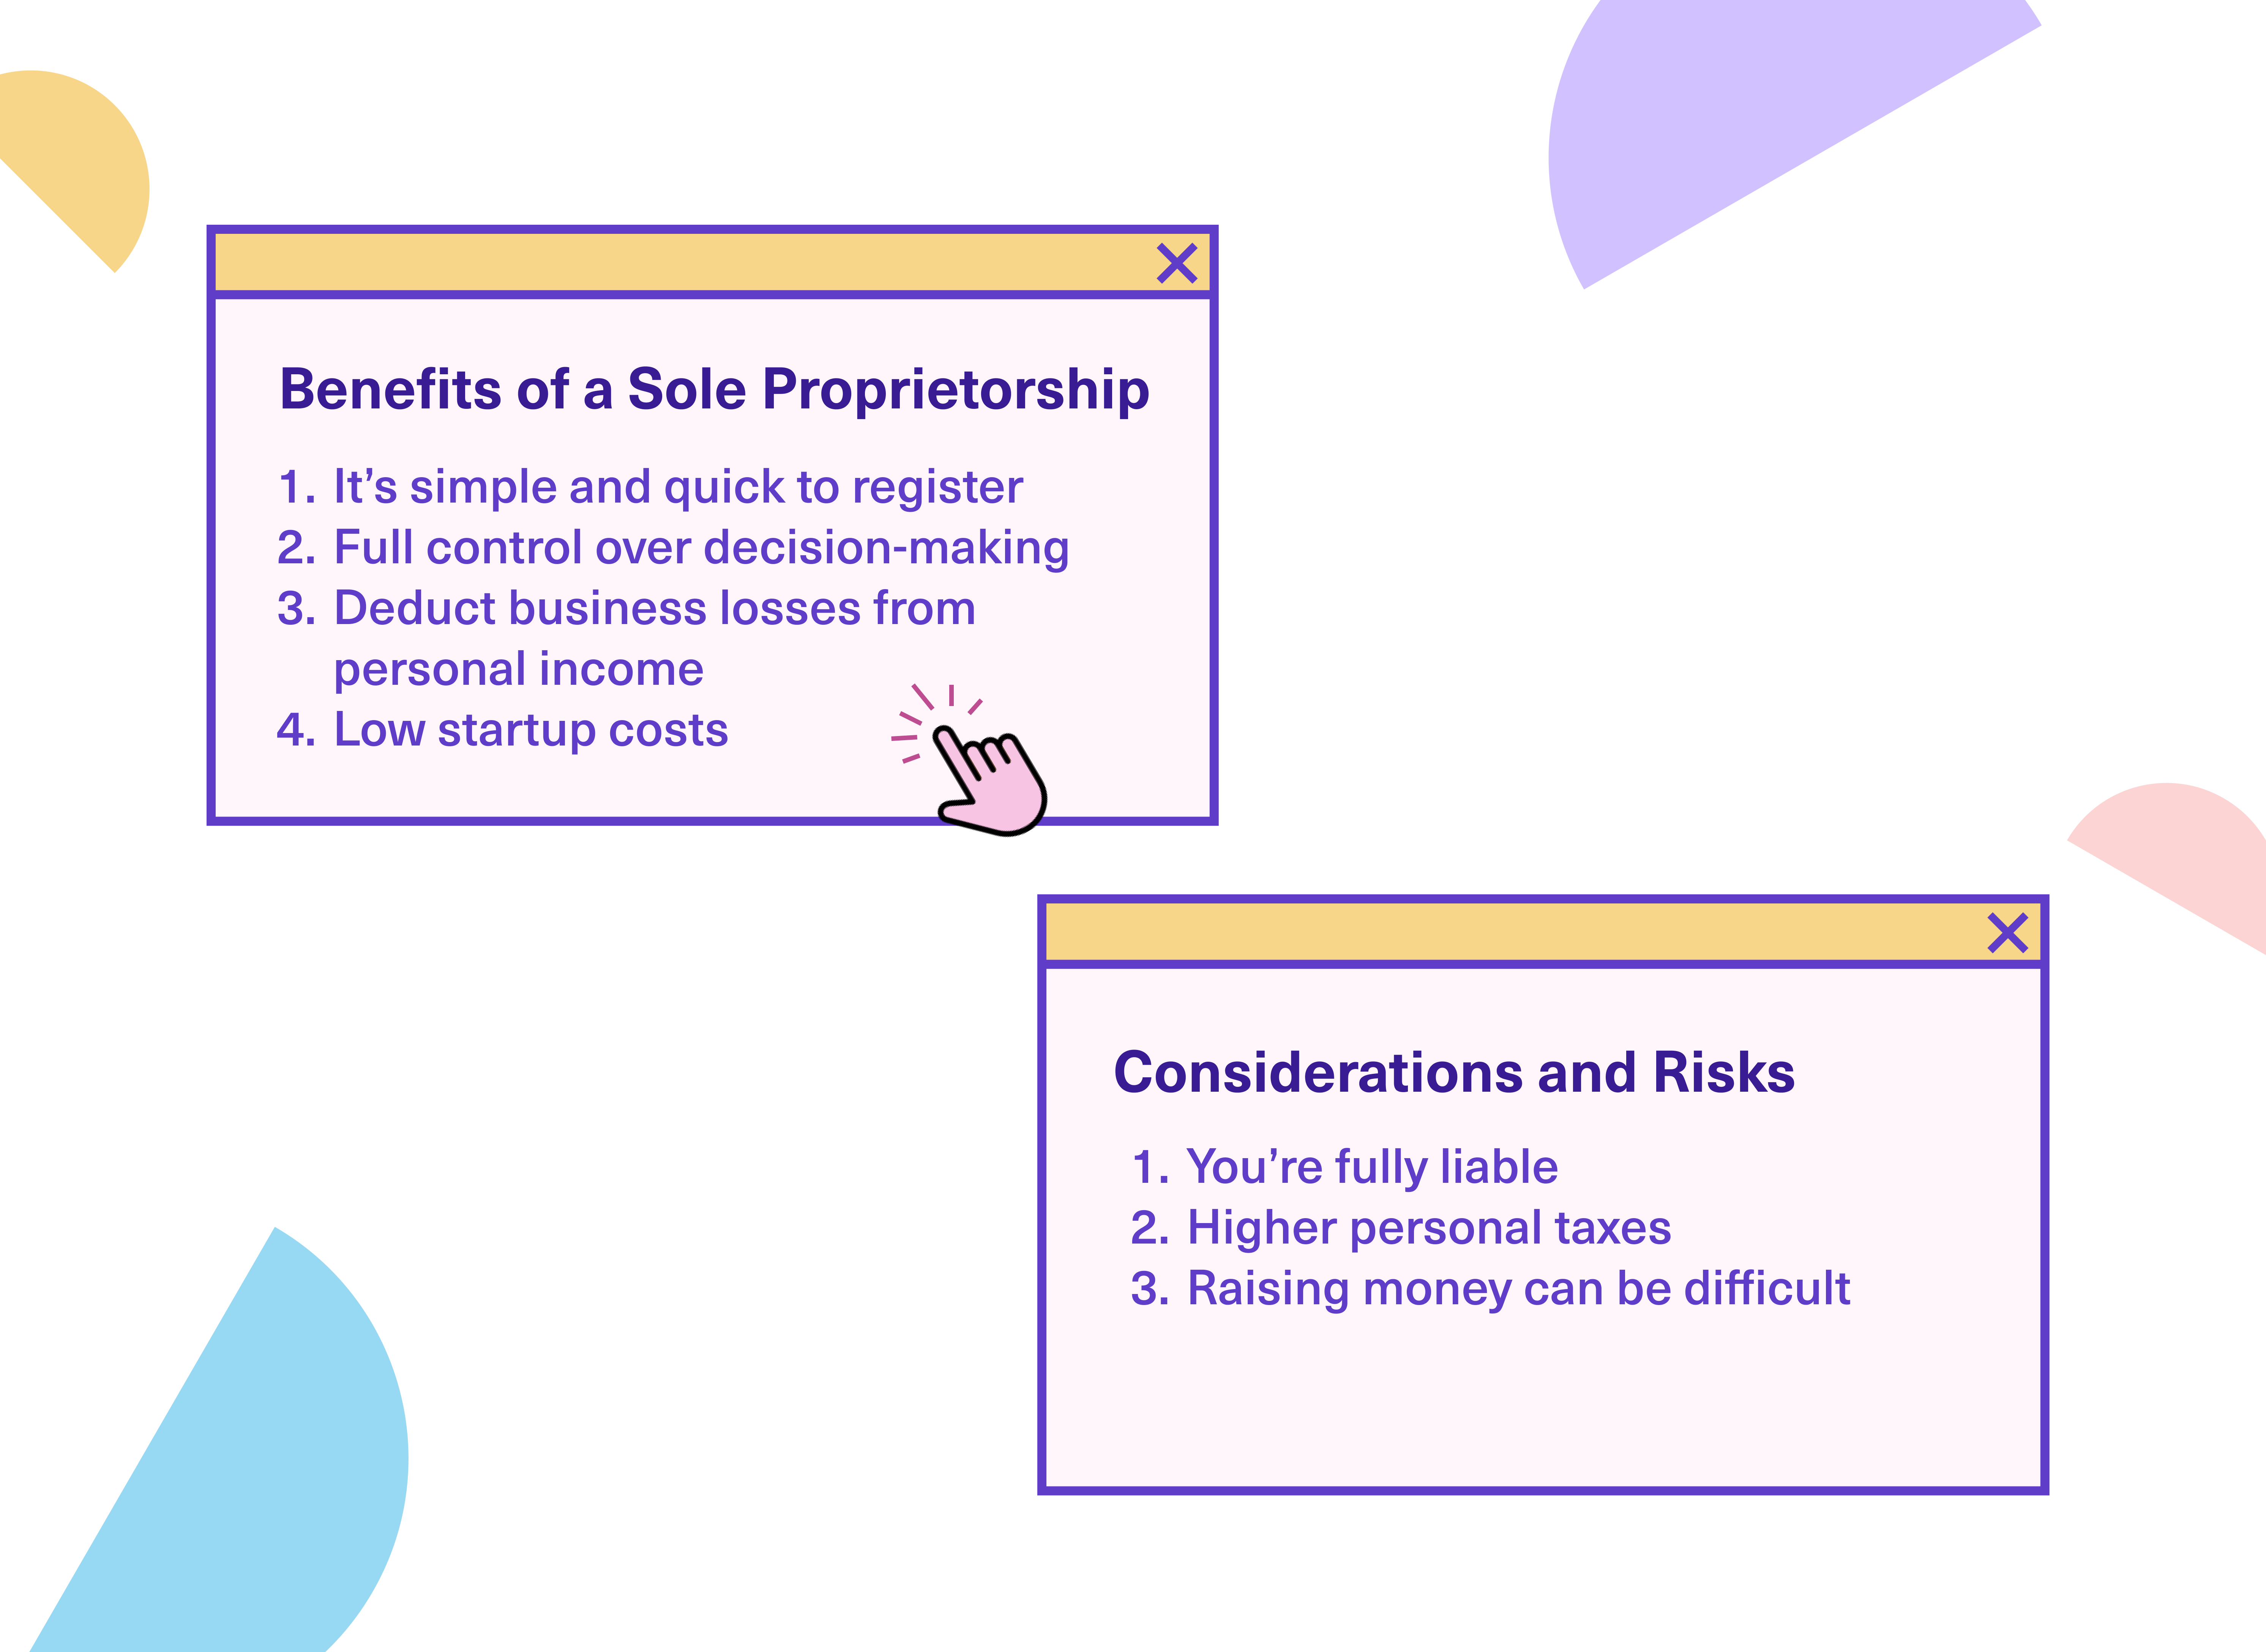 An infographic showing the pros and cons of a sole proprietorship